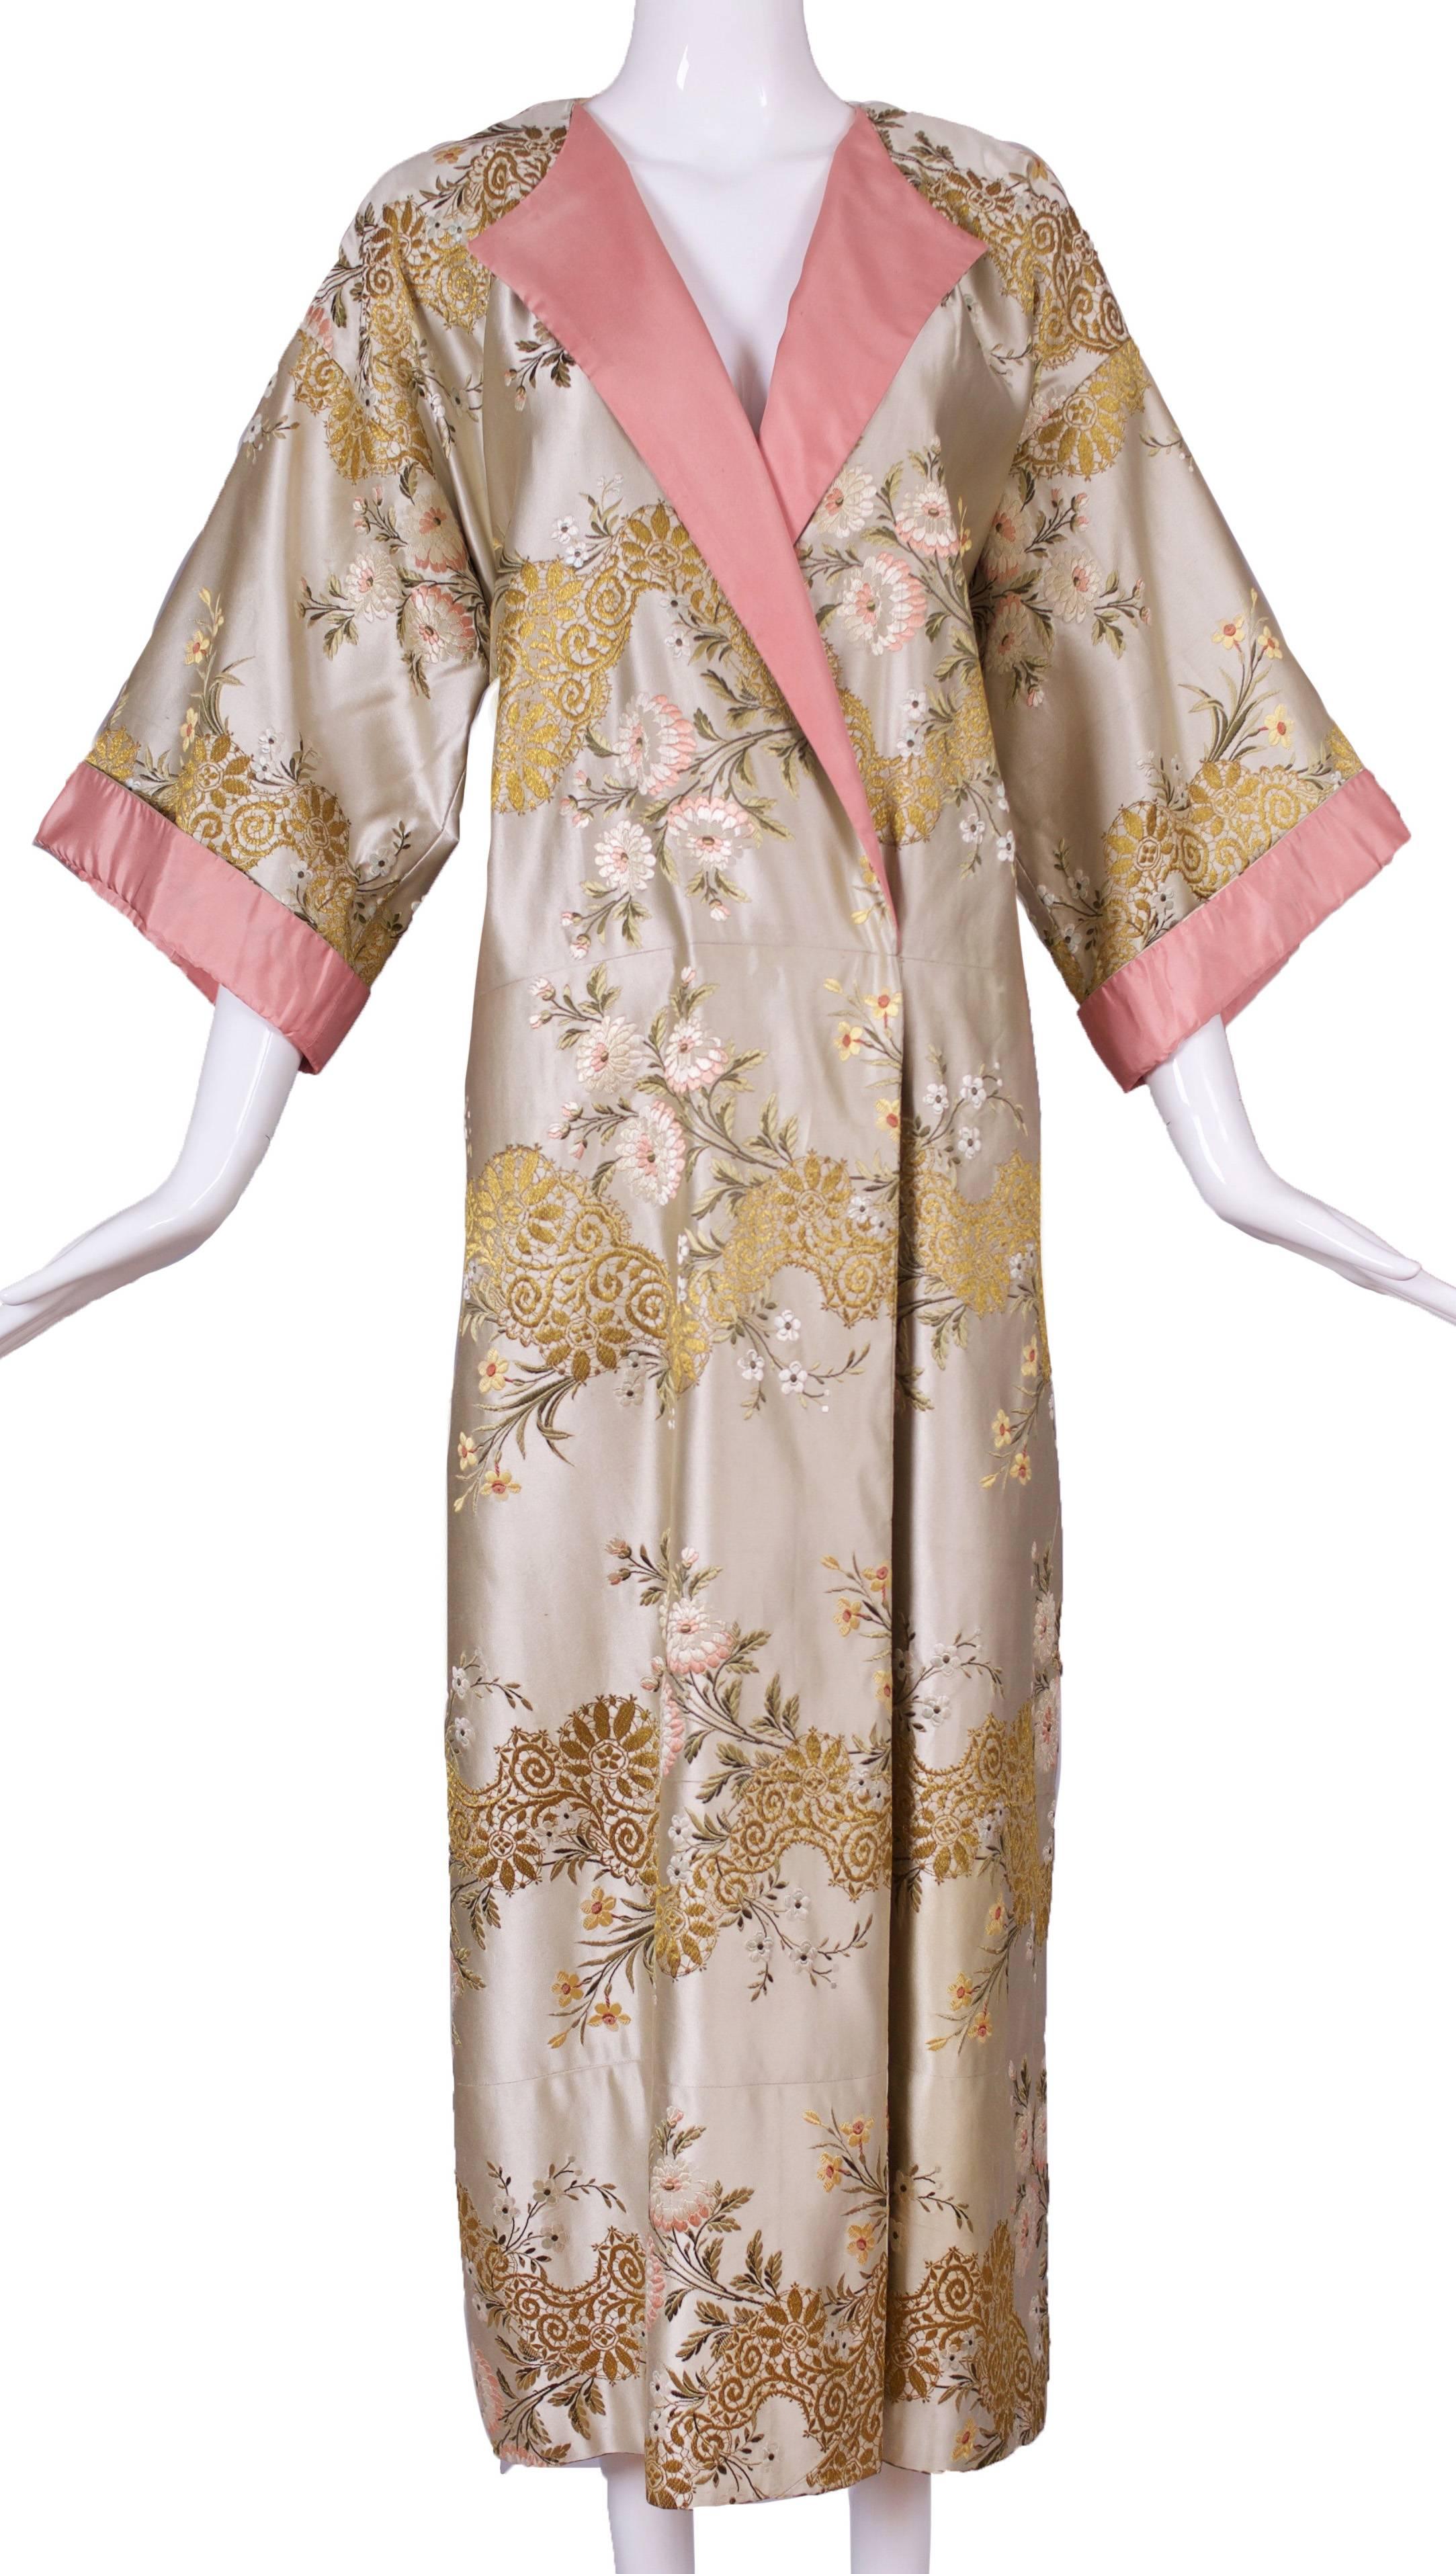 A circa 1960 Madame Gres haute couture kimono evening dress in pastel hues and a floral embroidered motif that includes gold thread. Trimmed at the neck, 3/4 sleeves and an attached waist tie with rose pink silk taffeta. The kimono can be worn with